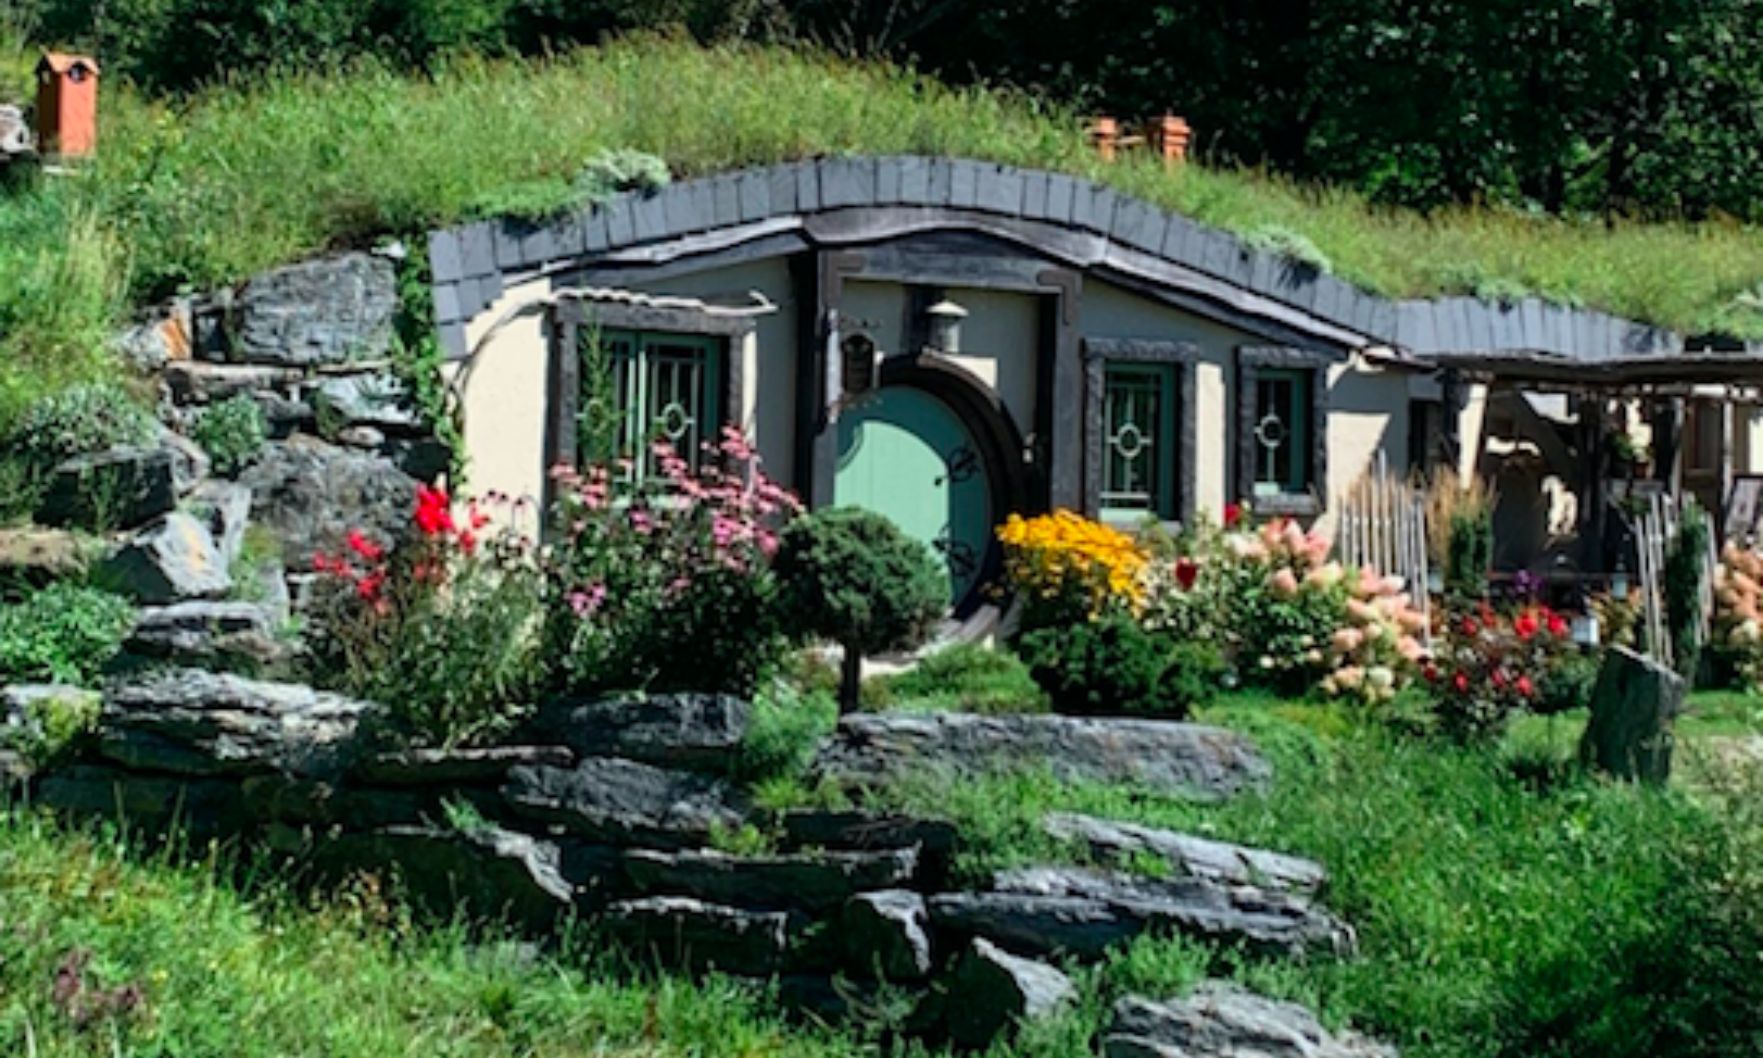 15 Magical Hobbit Houses That'll Transport You to the Shire